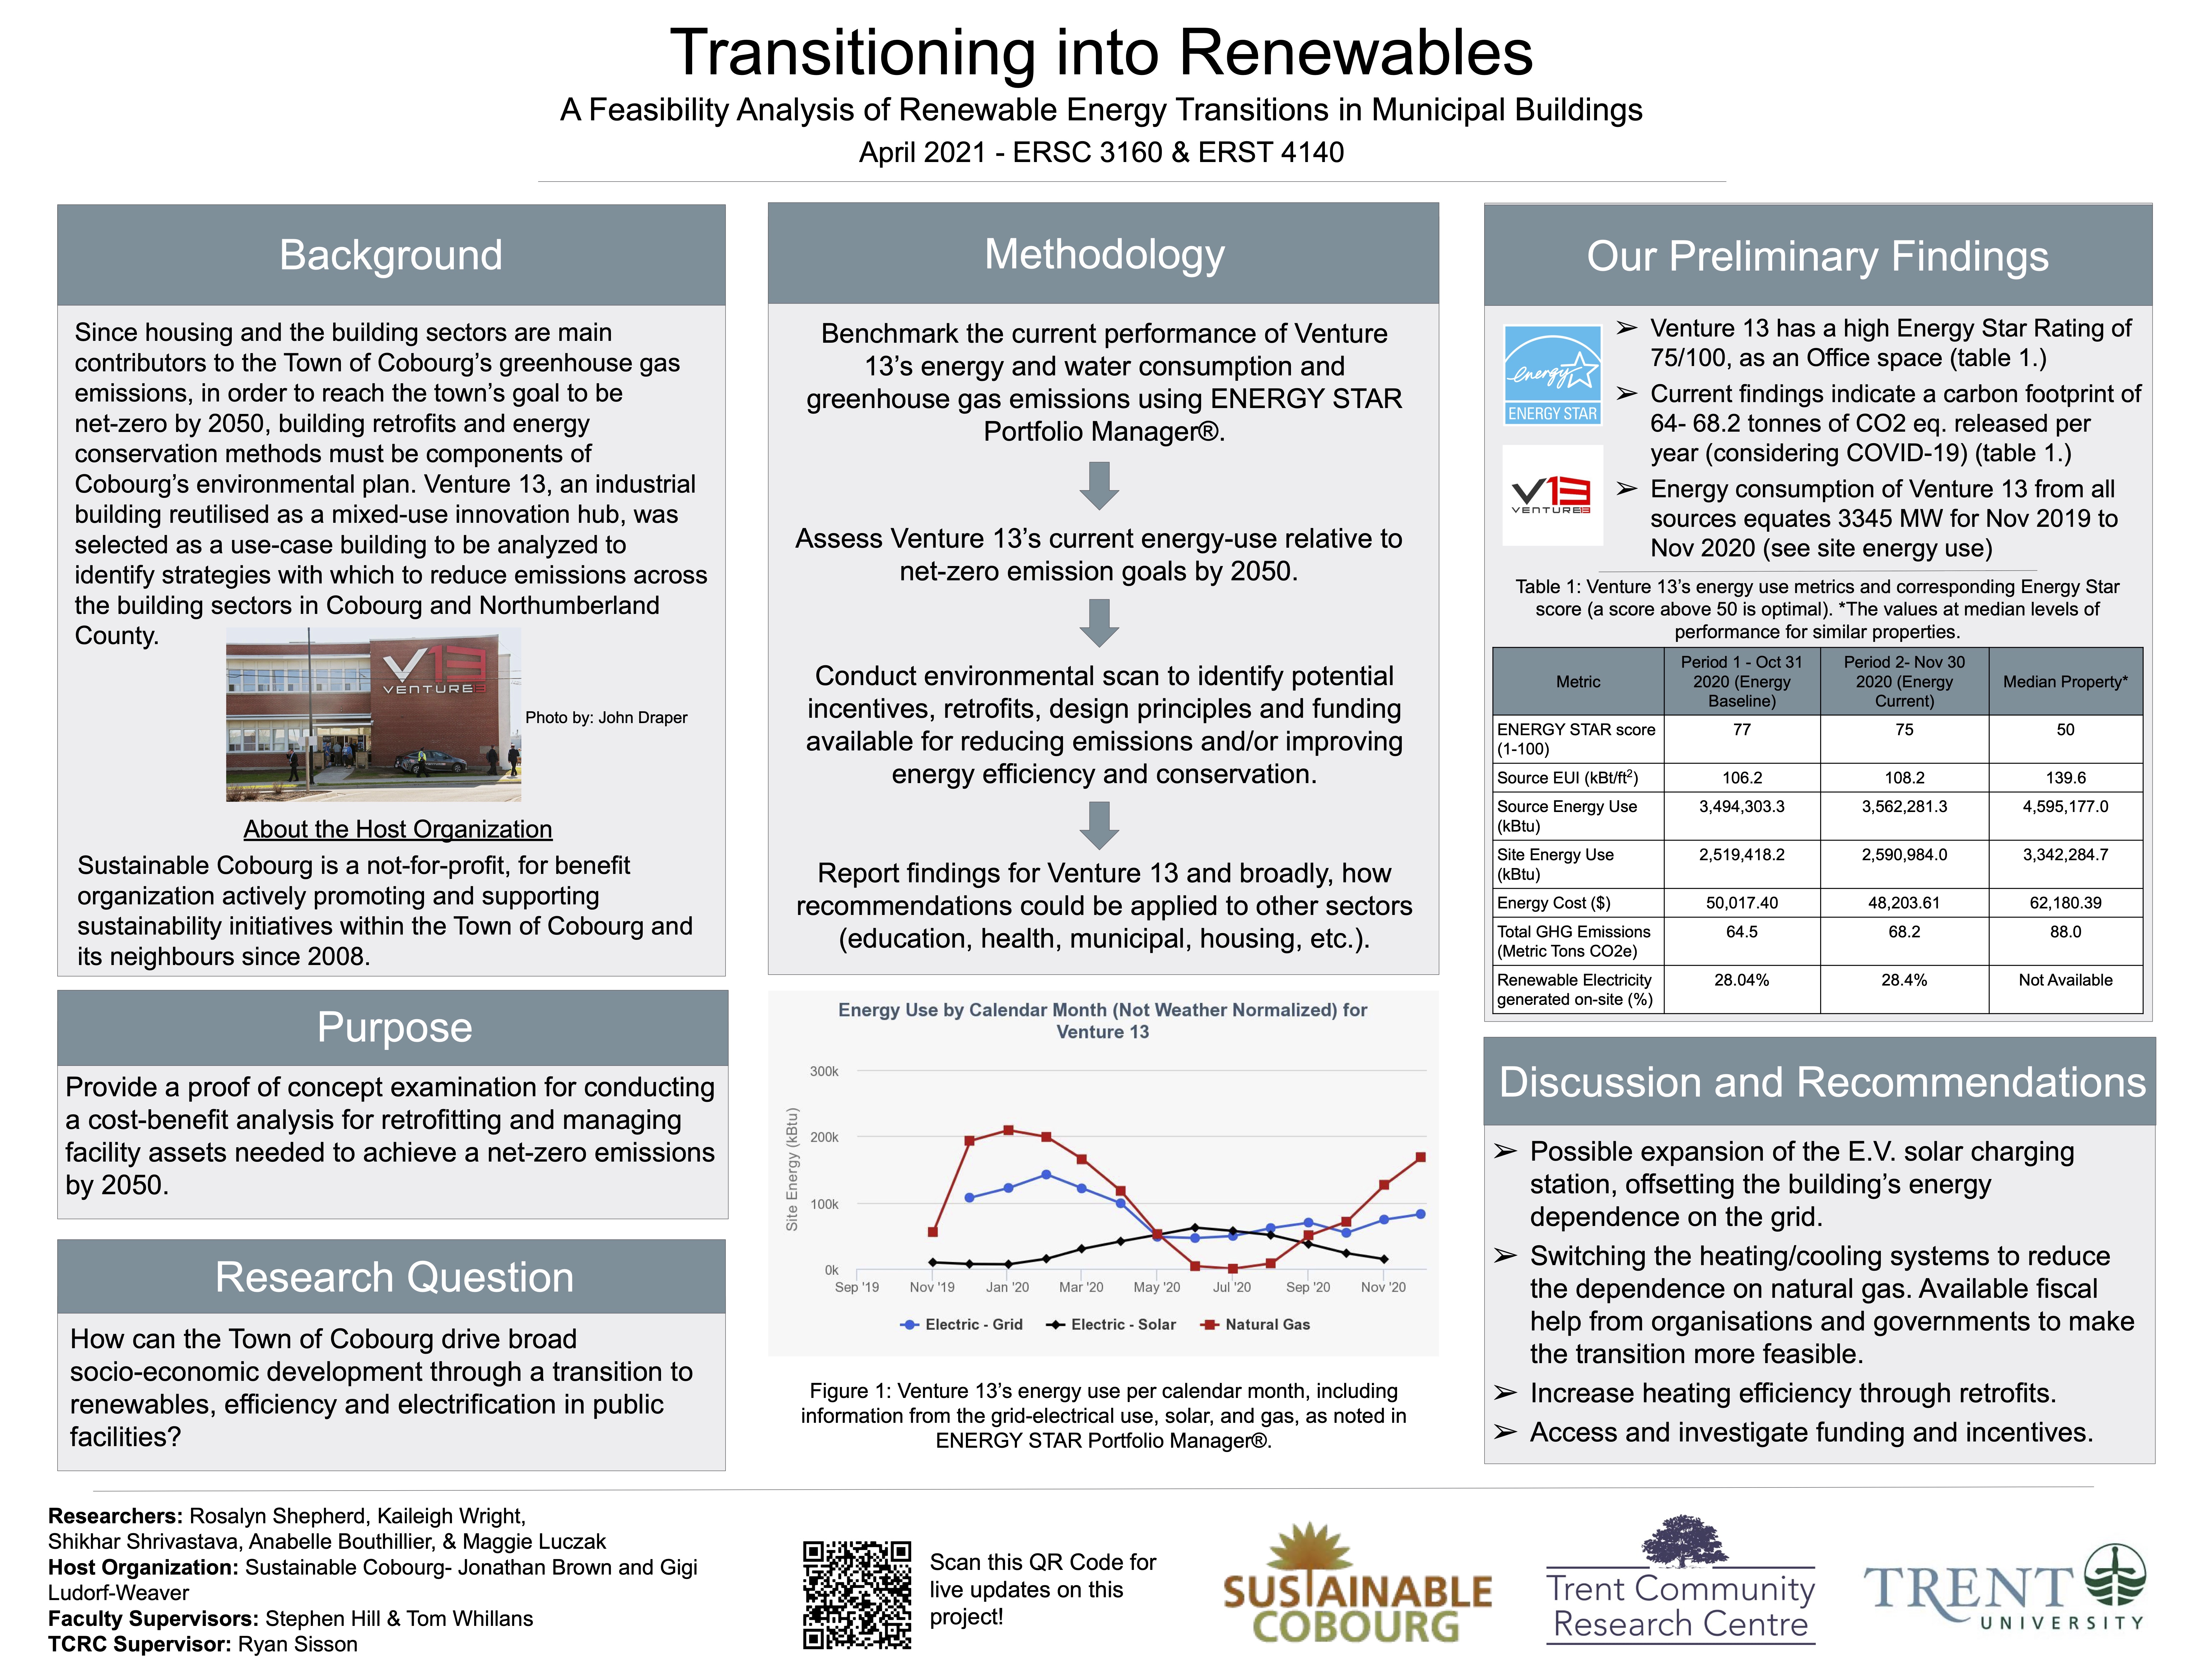 Research Poster for Feasibility Study for Transitioning Public Facilities to Renewable Energy: A Use Case